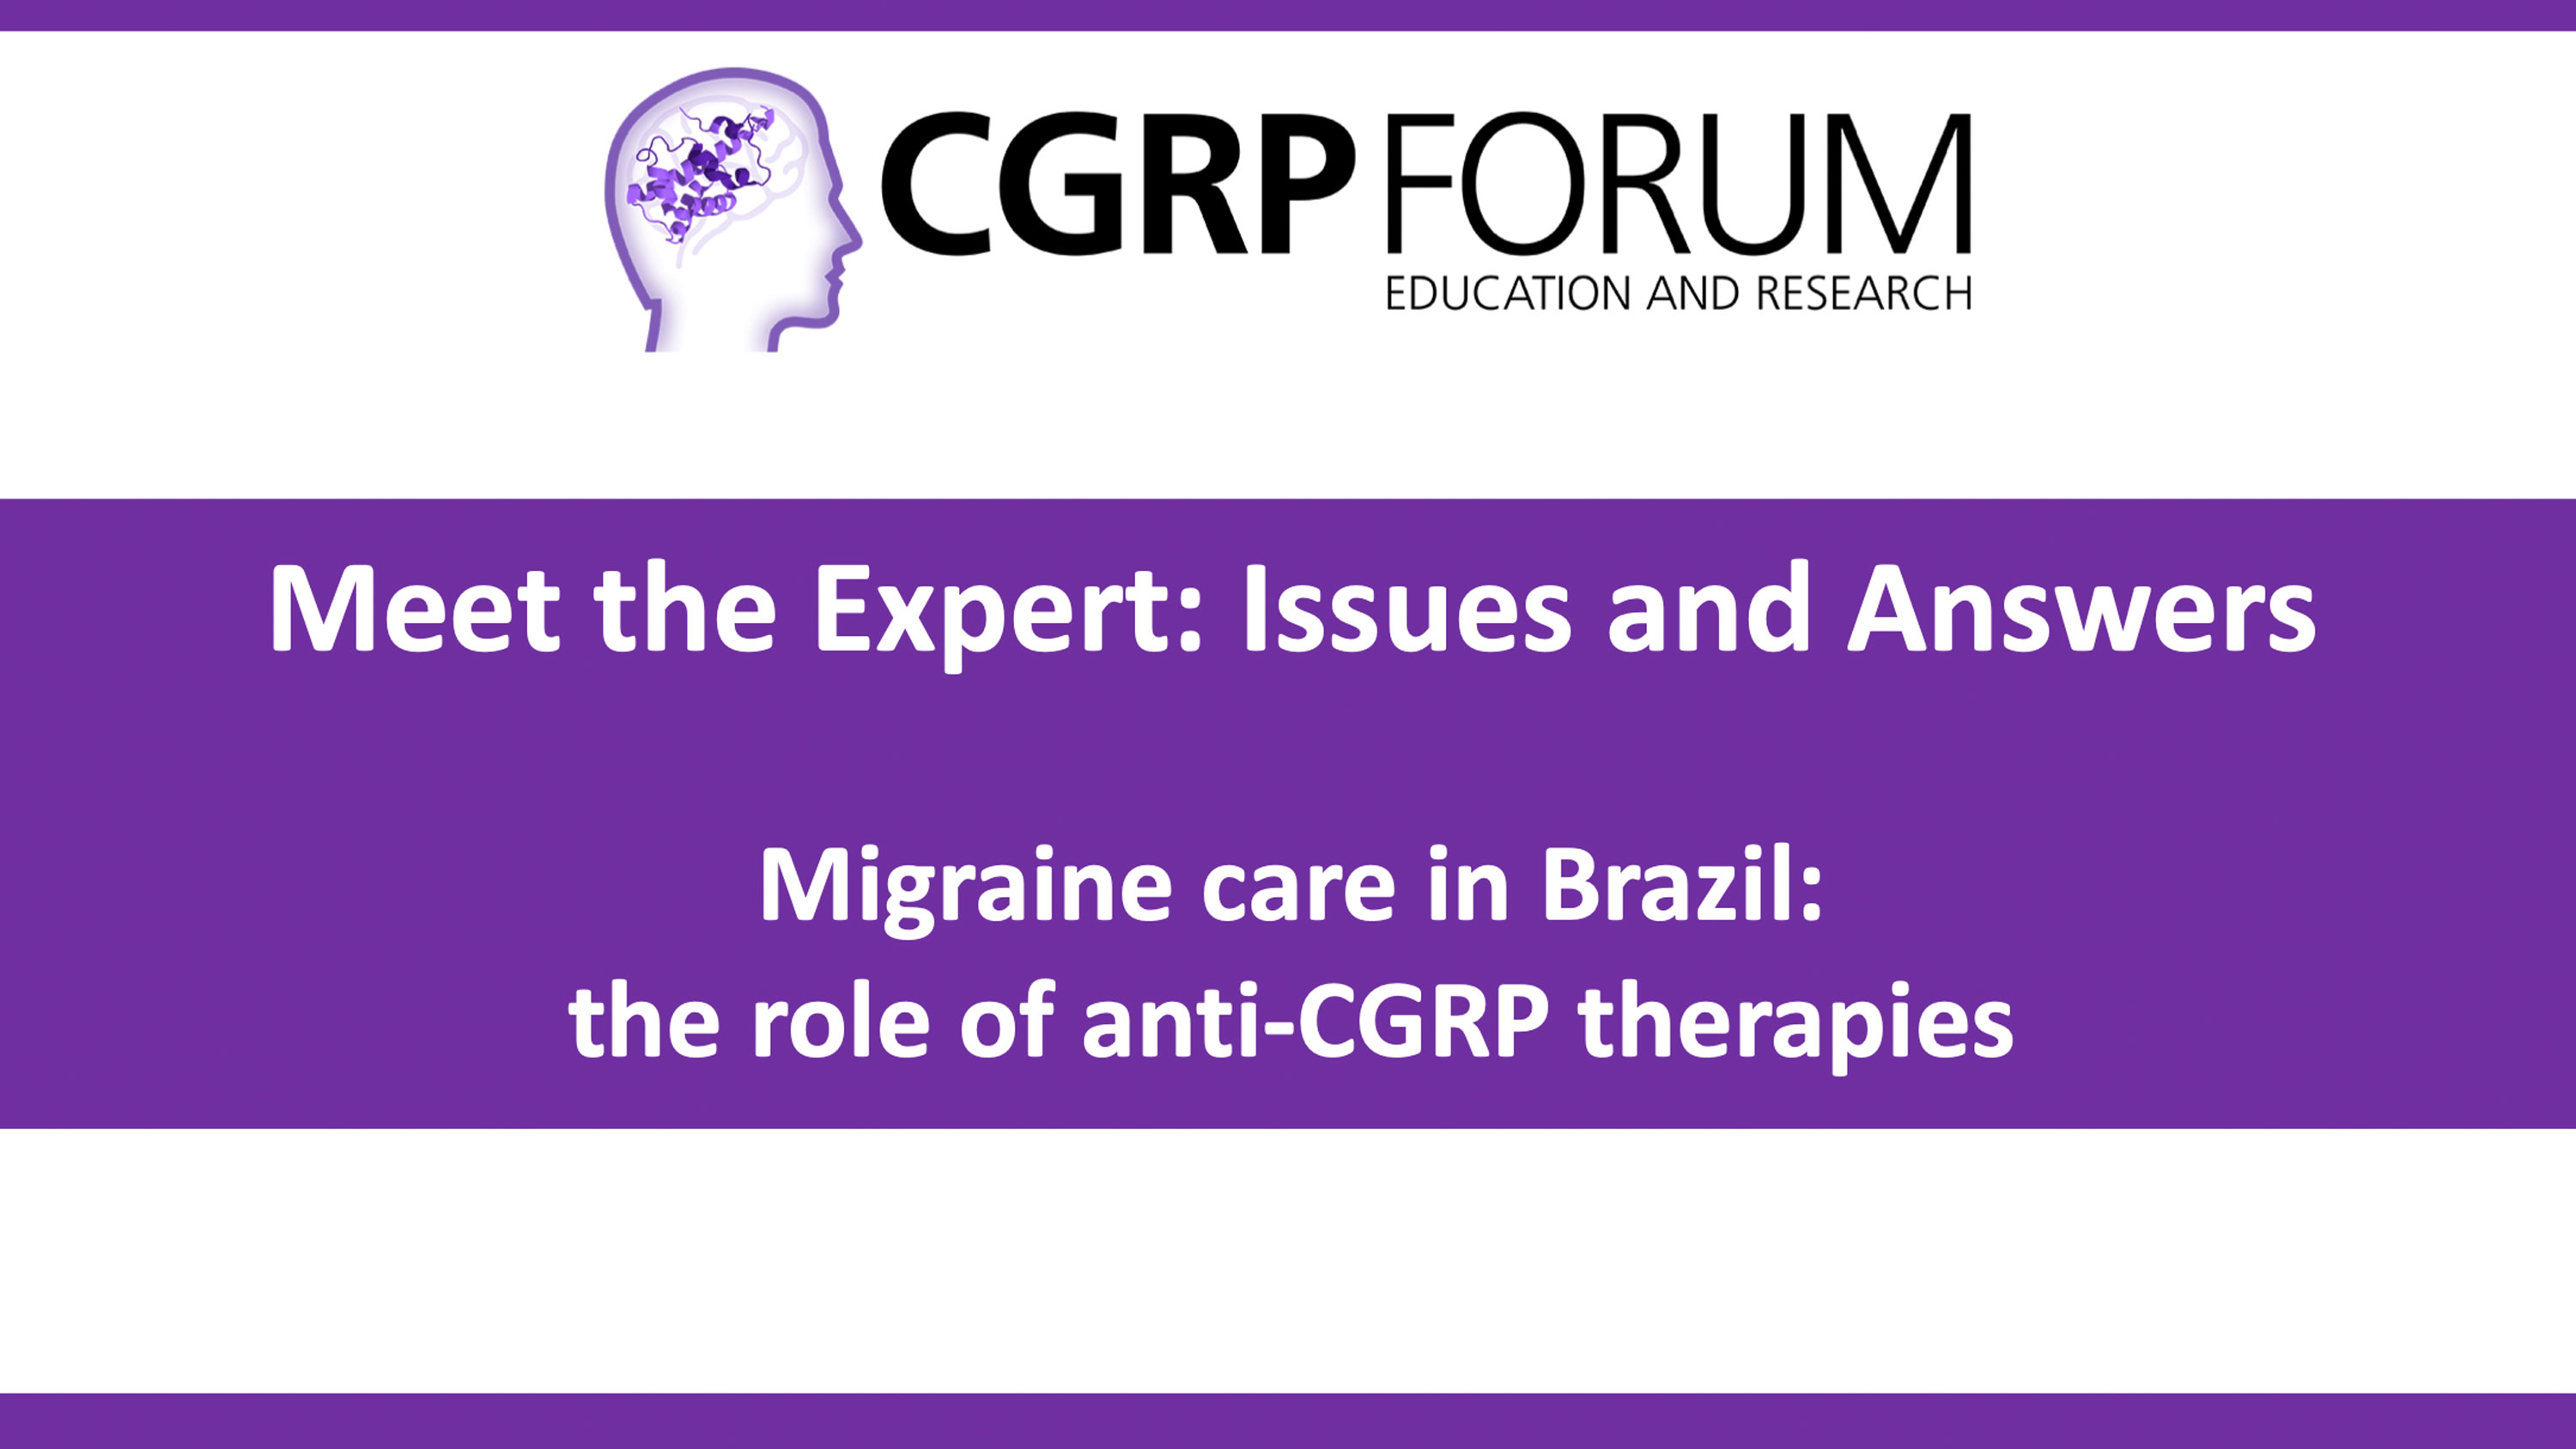 Migraine care in Brazil: the role of anti-CGRP therapies